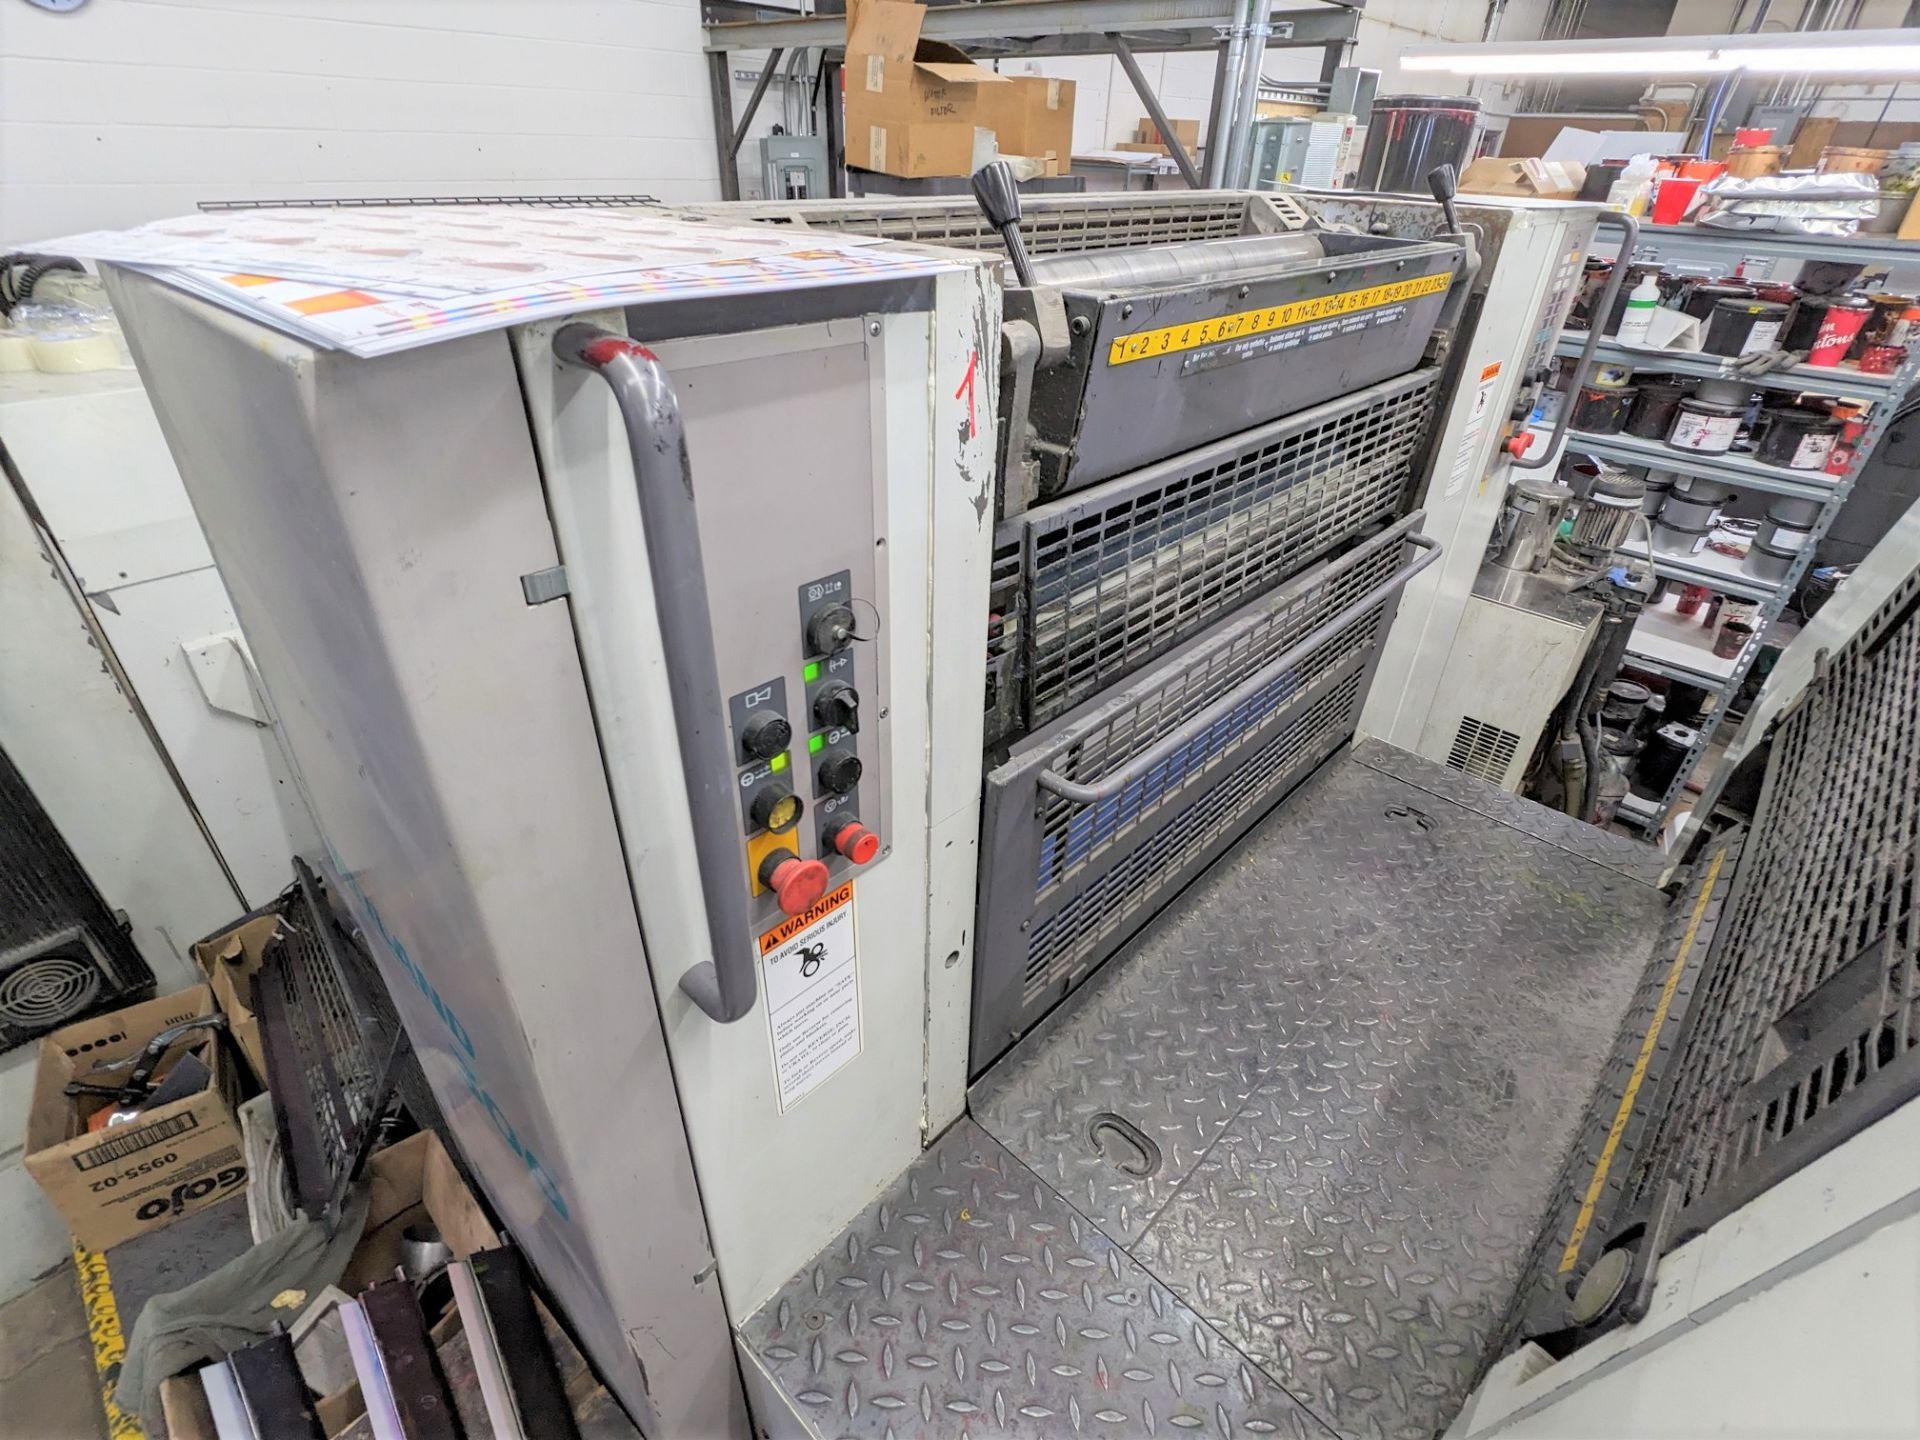 1995 MAN ROLAND 300 6-COLOUR OFFSET PRINTING PRESS, MODEL R306, S/N 25152B, TOTAL SHEET COUNT - Image 22 of 53